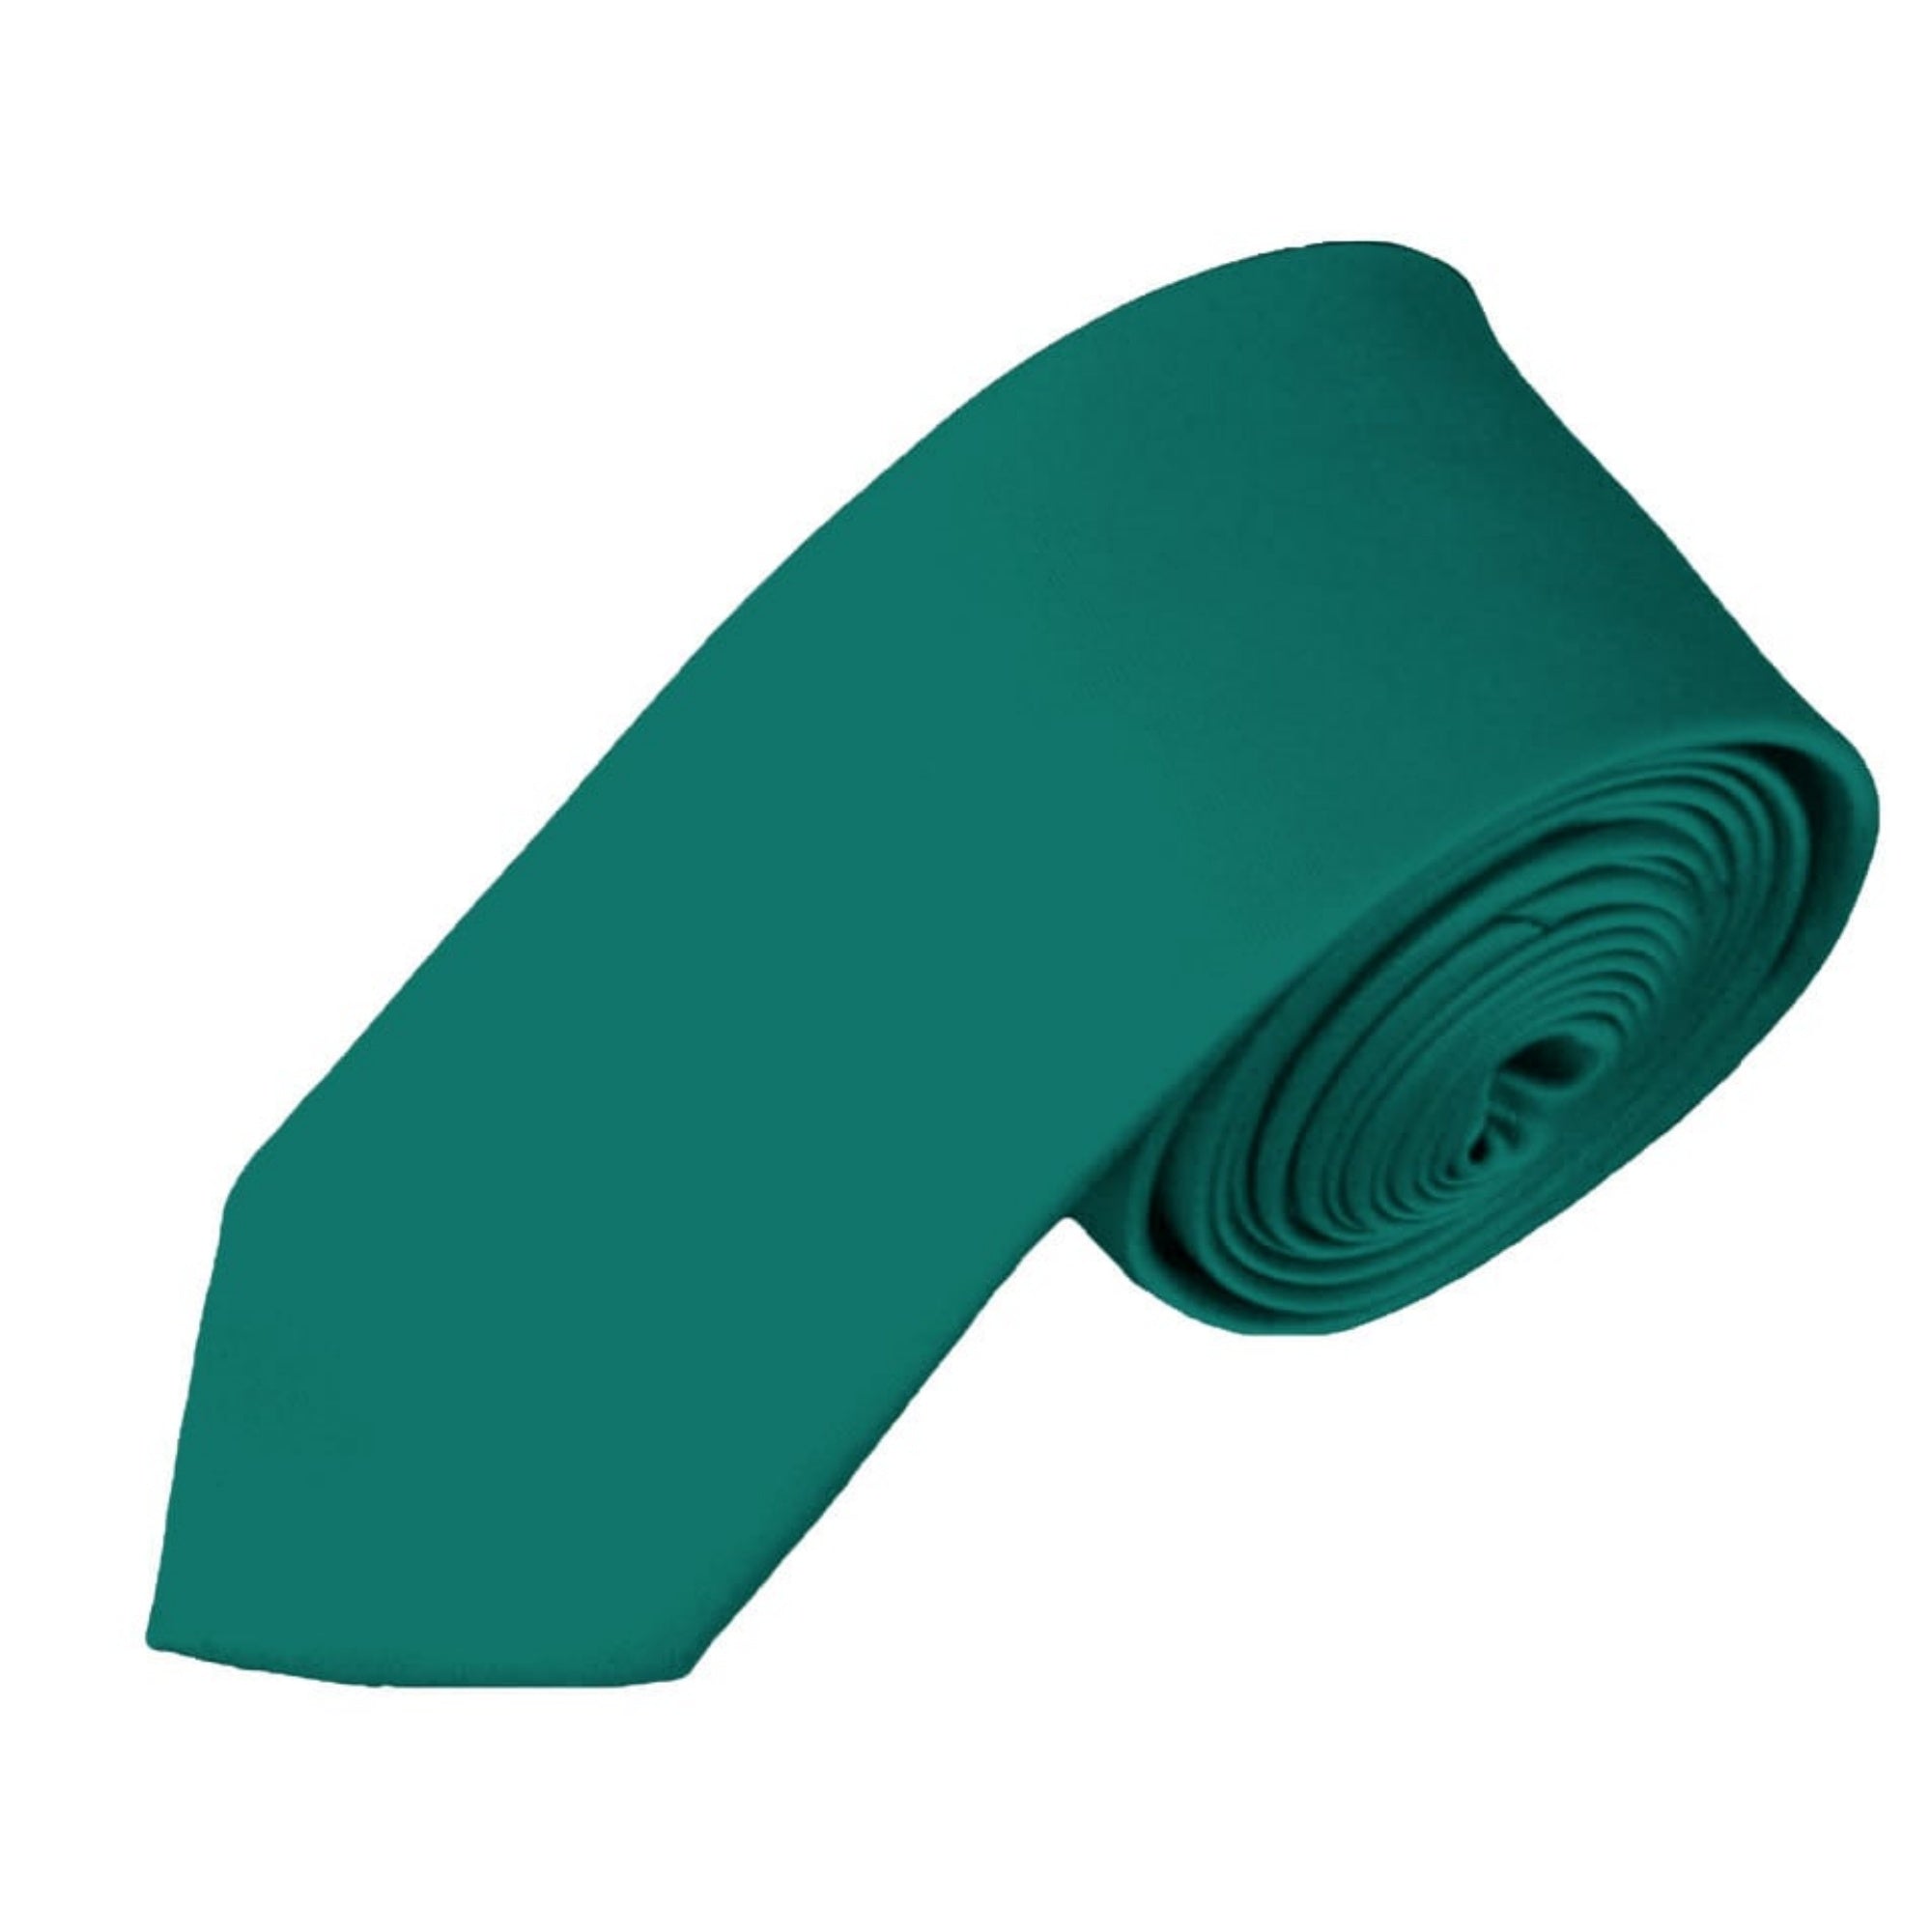 TheDapperTie Boy's Solid Color 2.75 Inch Wide And 48 Inch Long Neckties Neck Tie TheDapperTie Teal Green  